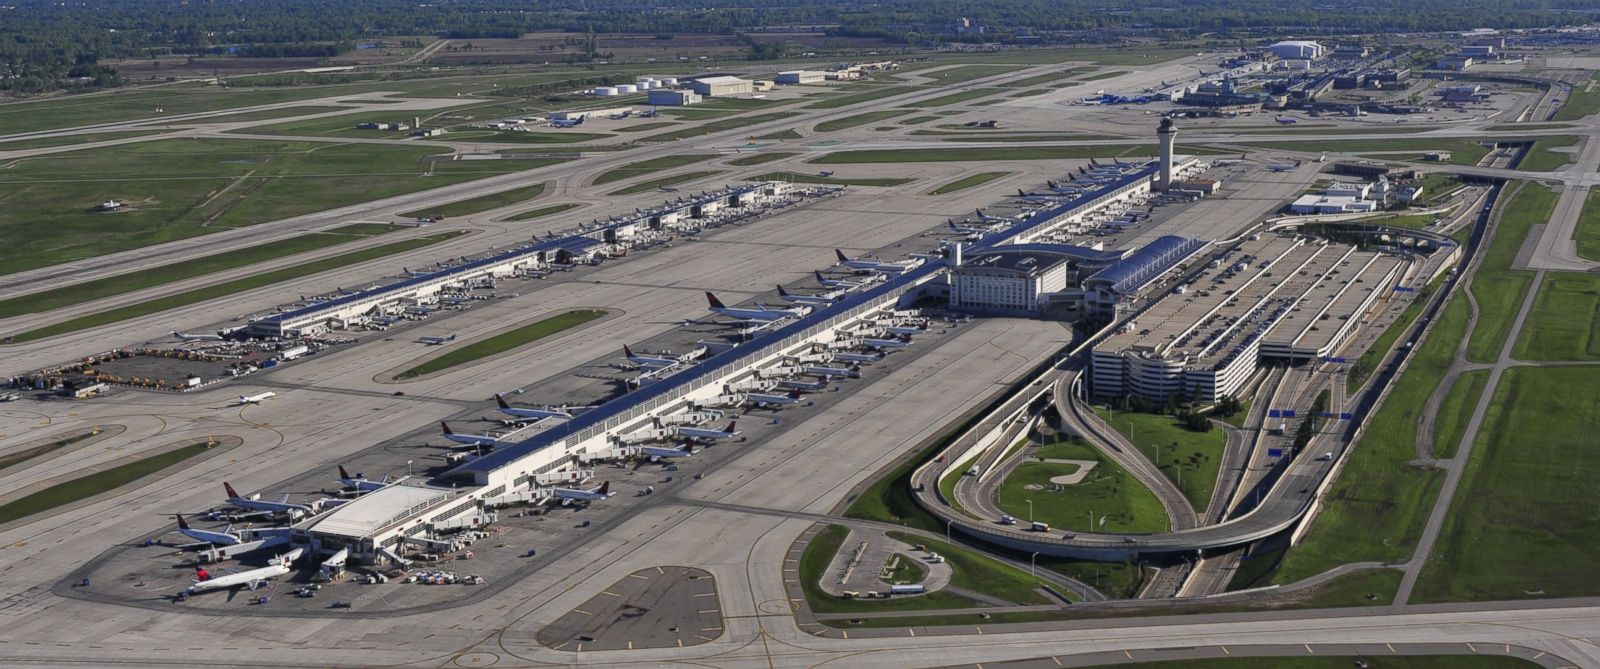 American airlines pilot arrested after failing breathalyzer test at detroit airport